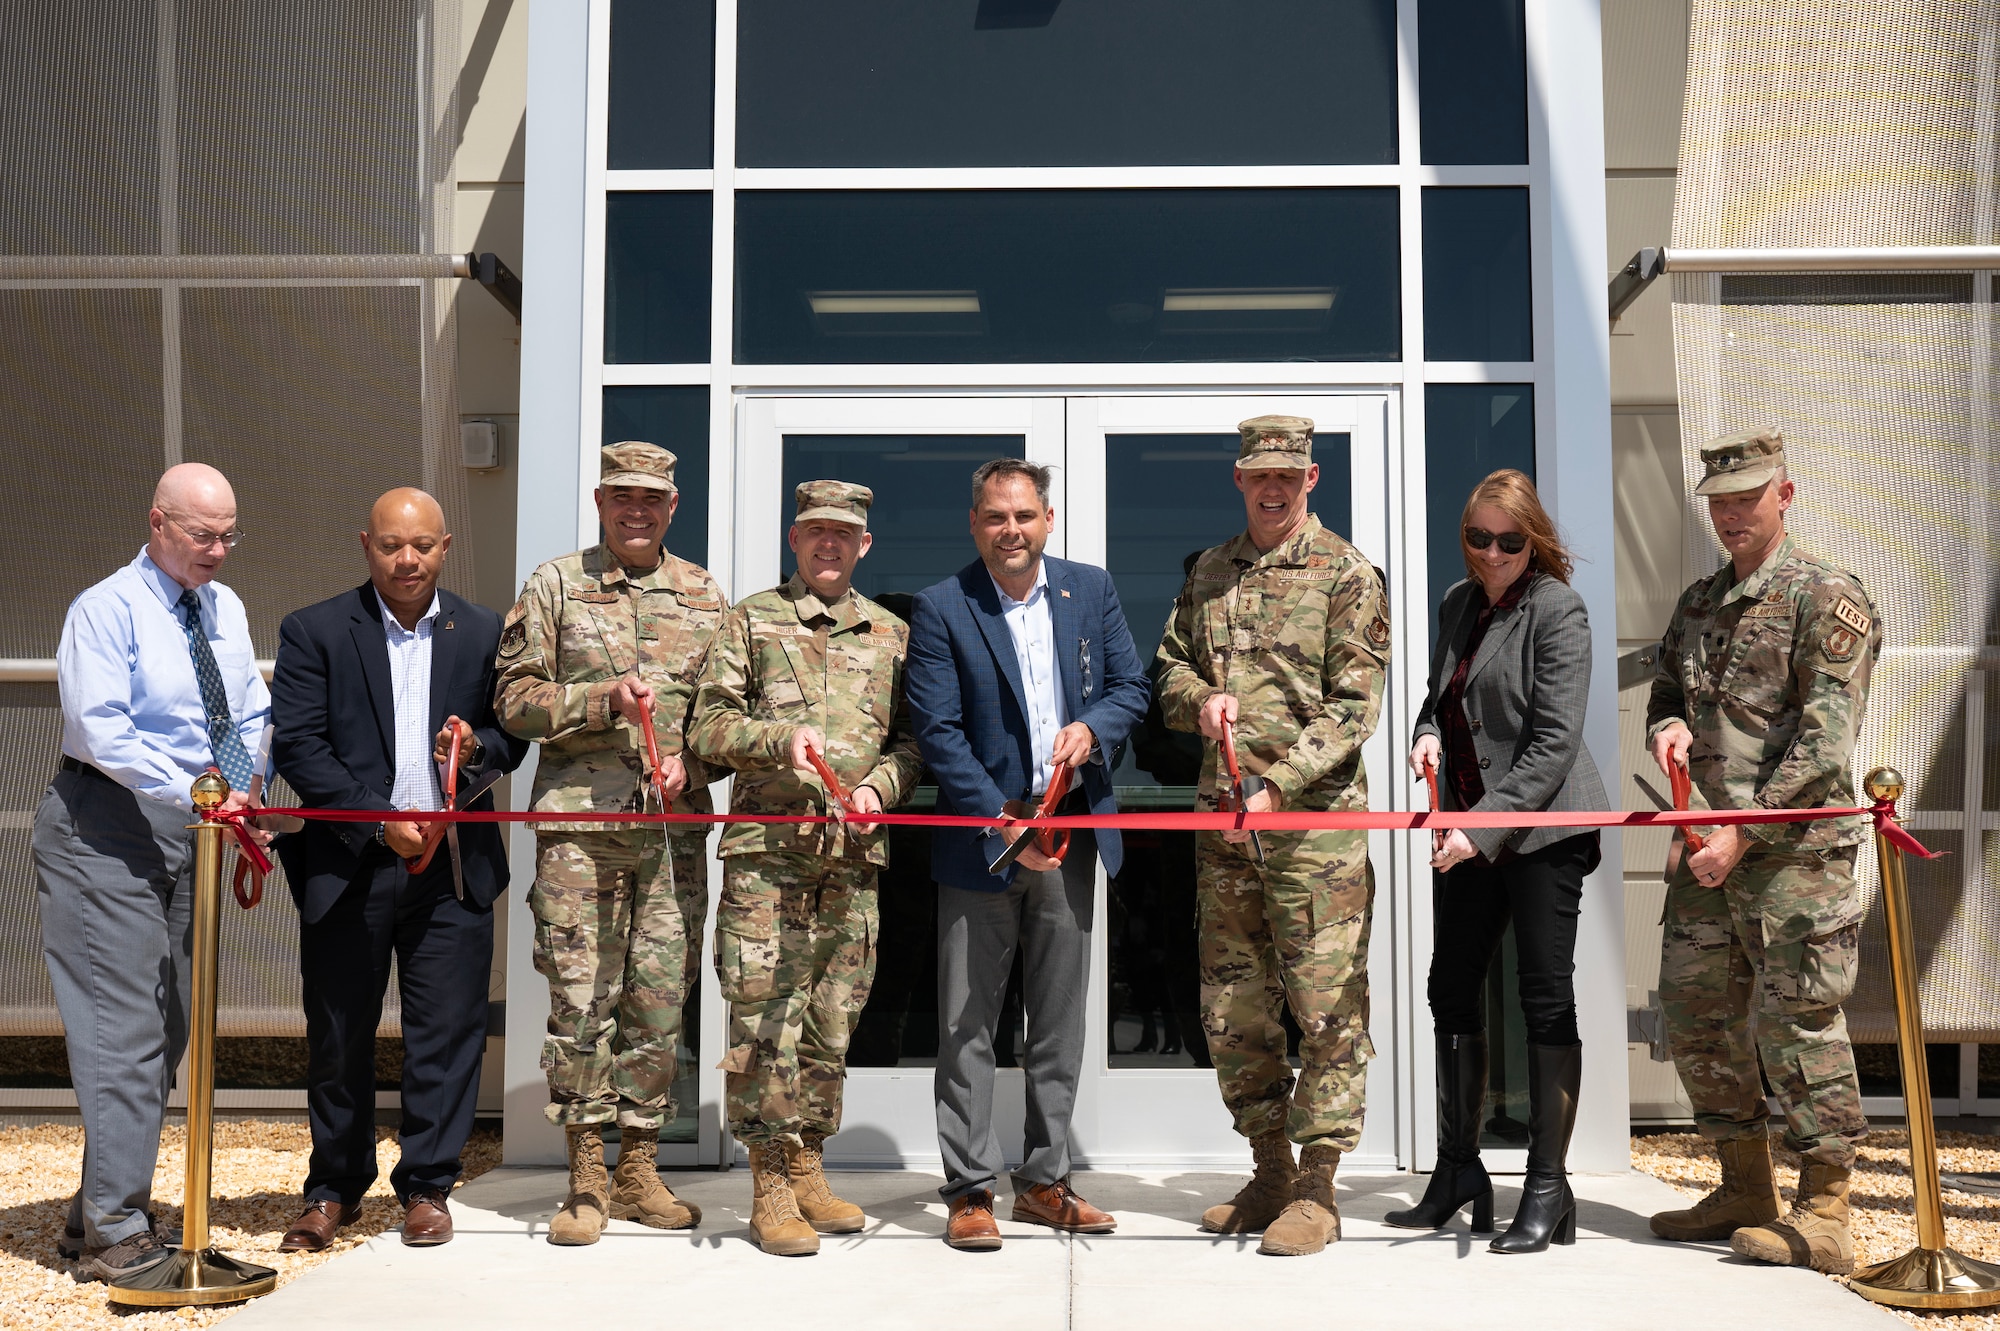 Stakeholders prepare to cut the ribbon at the Digital Test and Training Range Facility Ribbon-Cutting Ceremony at Edwards Air Force Base, California, May 8, 2023. The DTTR is specifically designed to meet the unique and complex needs of the Joint Simulation Environment. Equipped with cutting-edge technology, the facility enables Edwards' skilled test professionals to work more effectively and efficiently than ever. (U.S. Air Force Photo/Tech. Sgt. Robert Cloys)